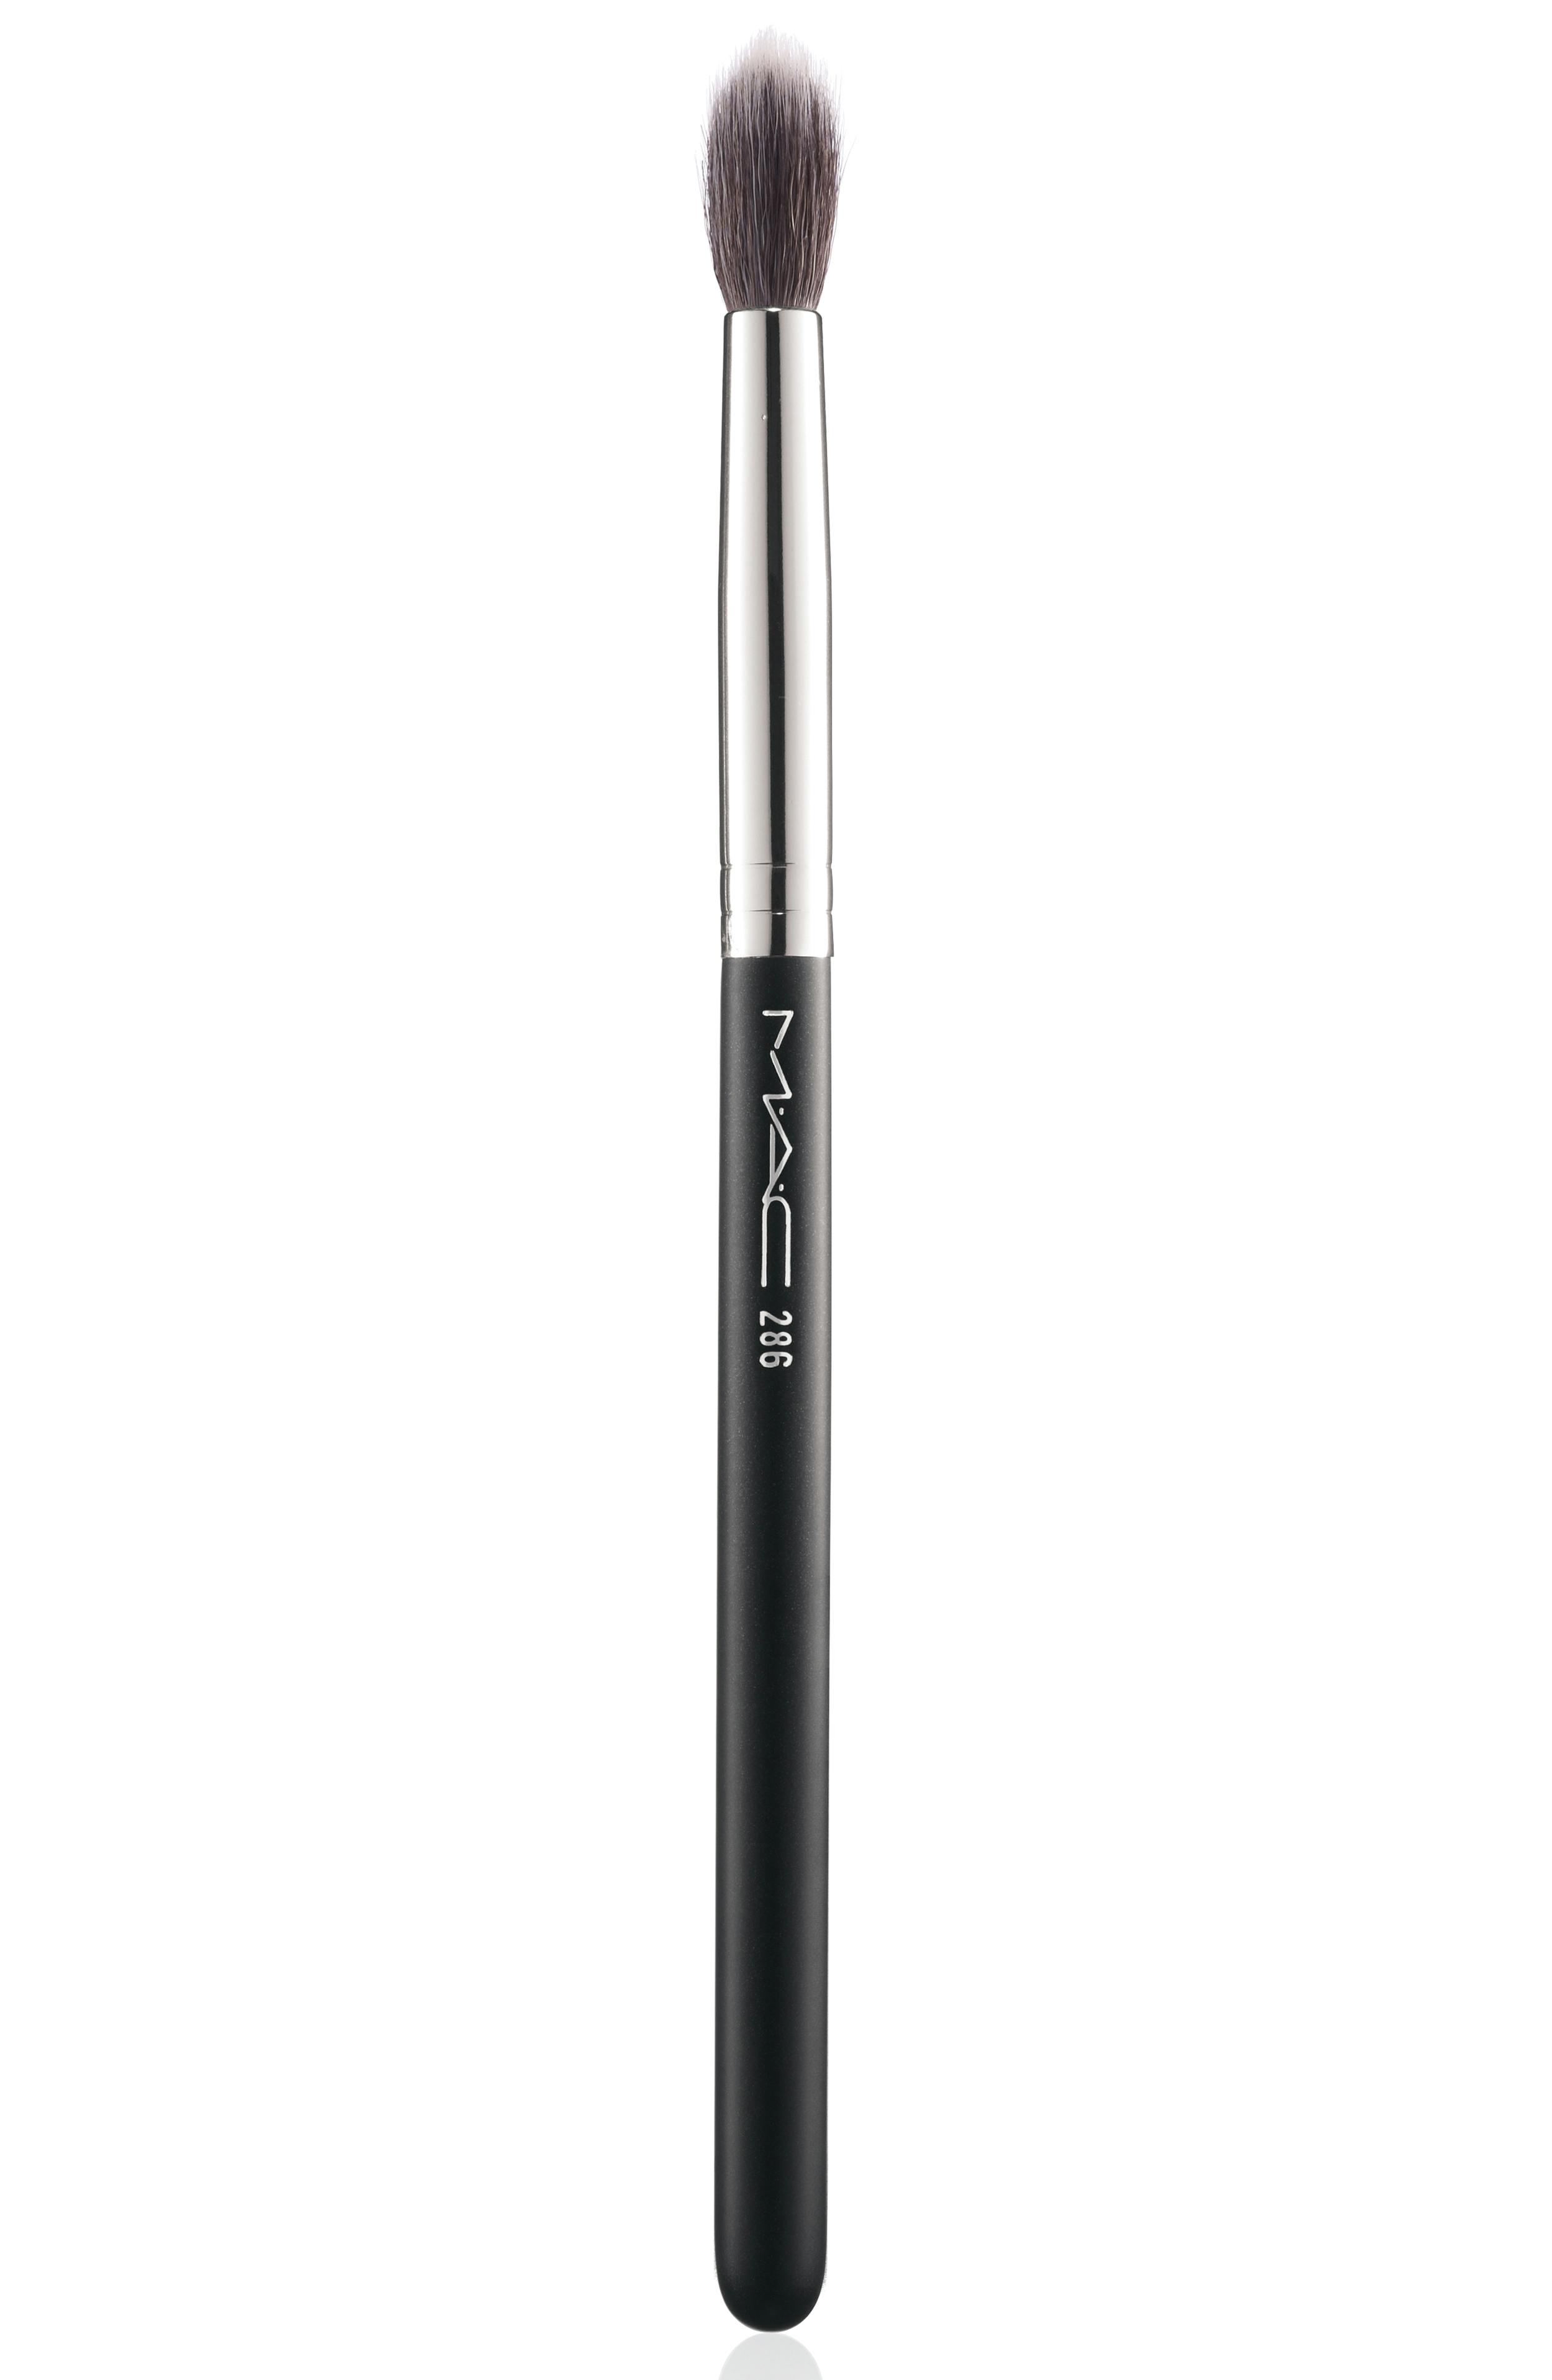 286 Synthetic Duo Fibre Tapered Brush, Mac, 190 kr. 